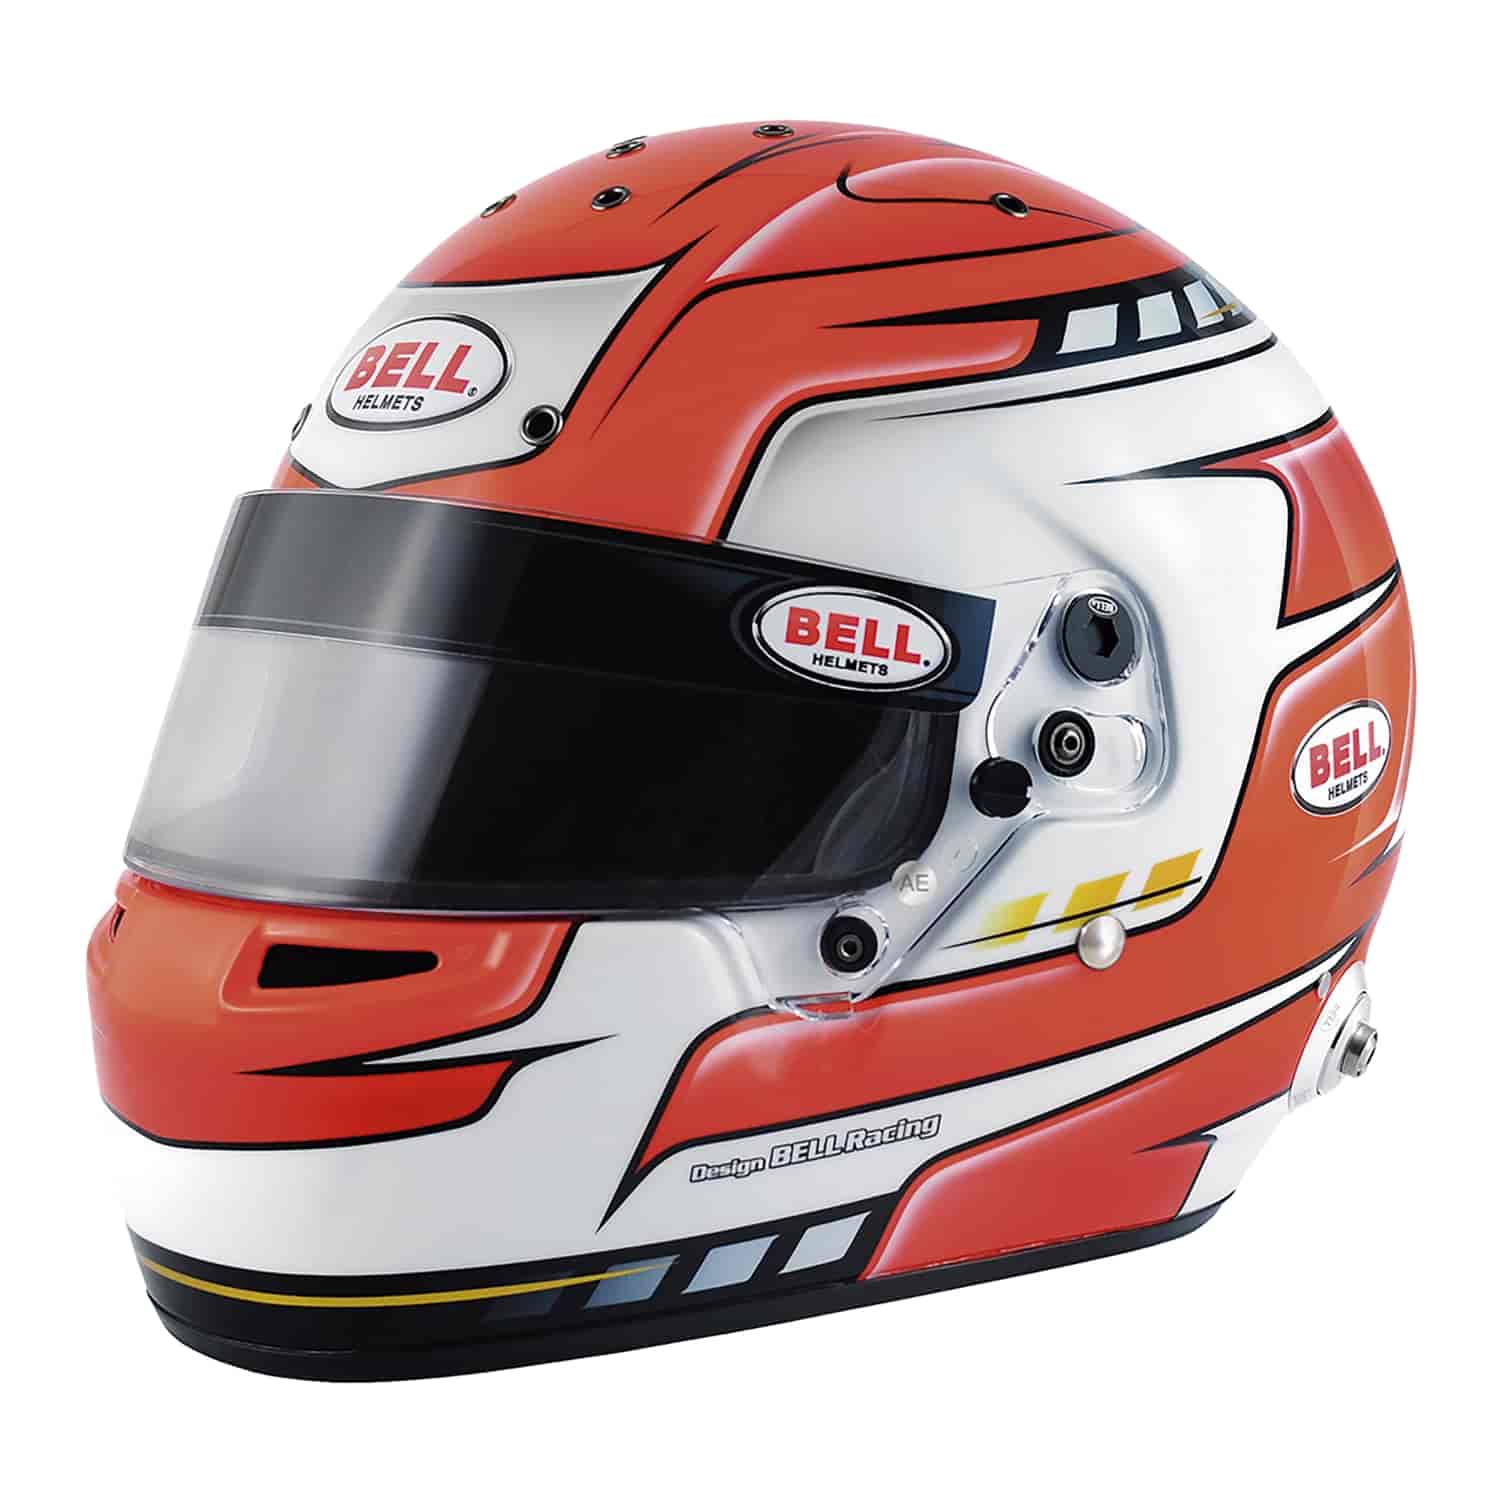 RS7 Helmet Falcon Red - Snell SA2015/FIA Approved